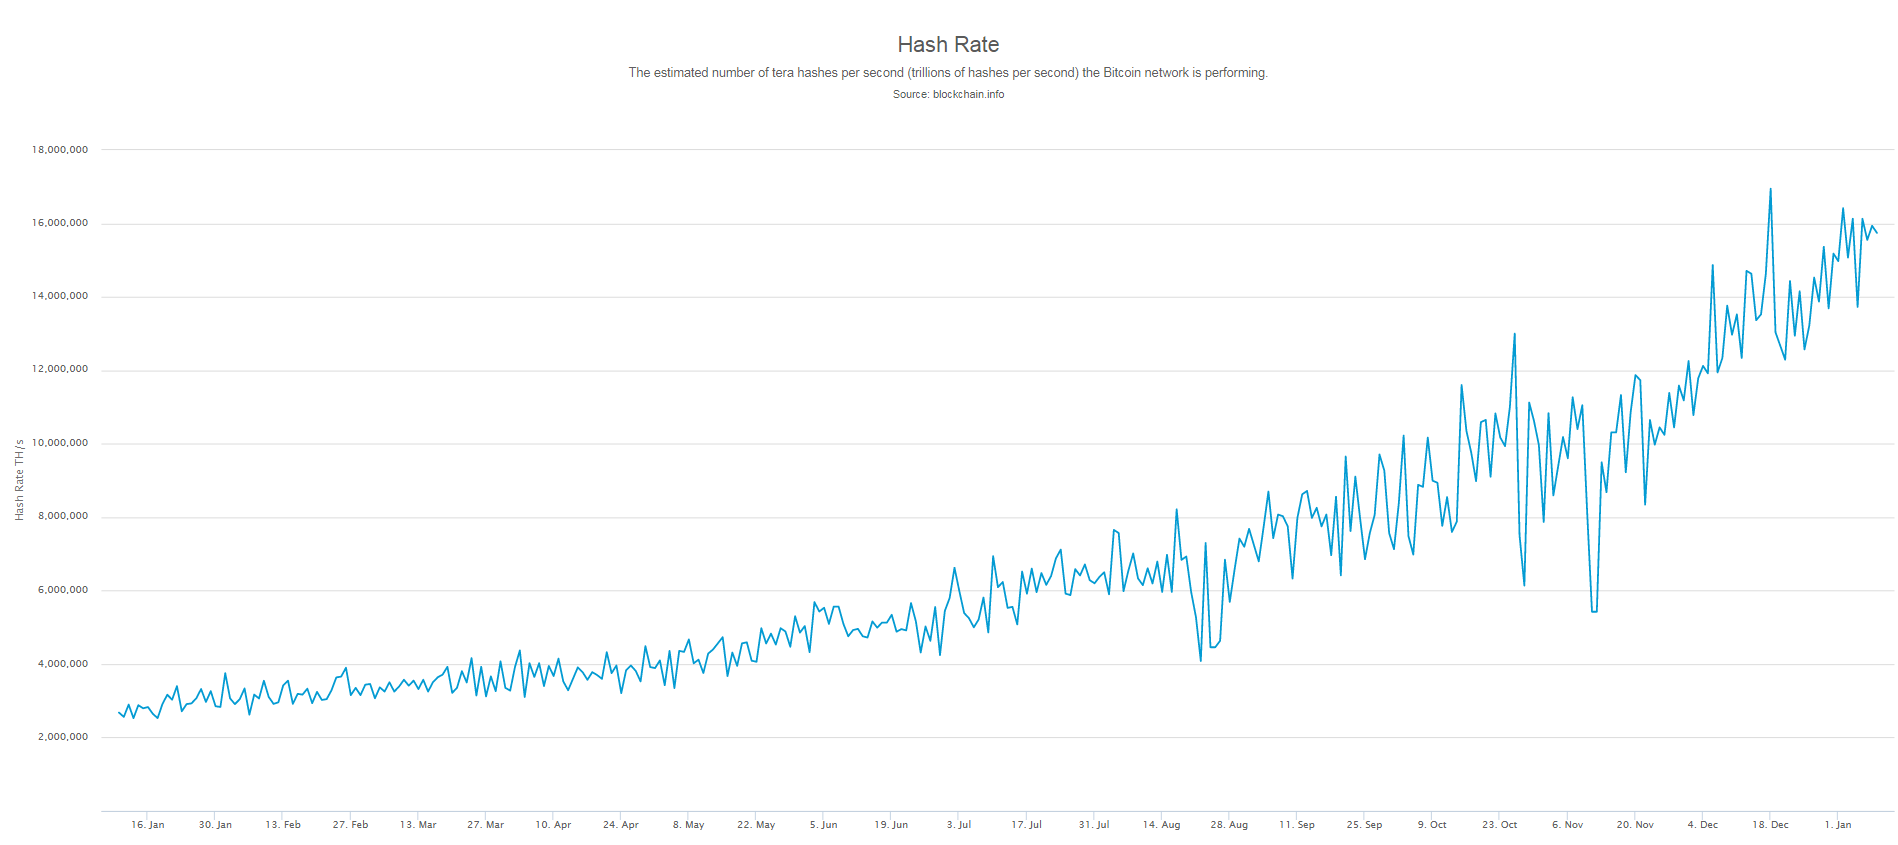 Hash Rate